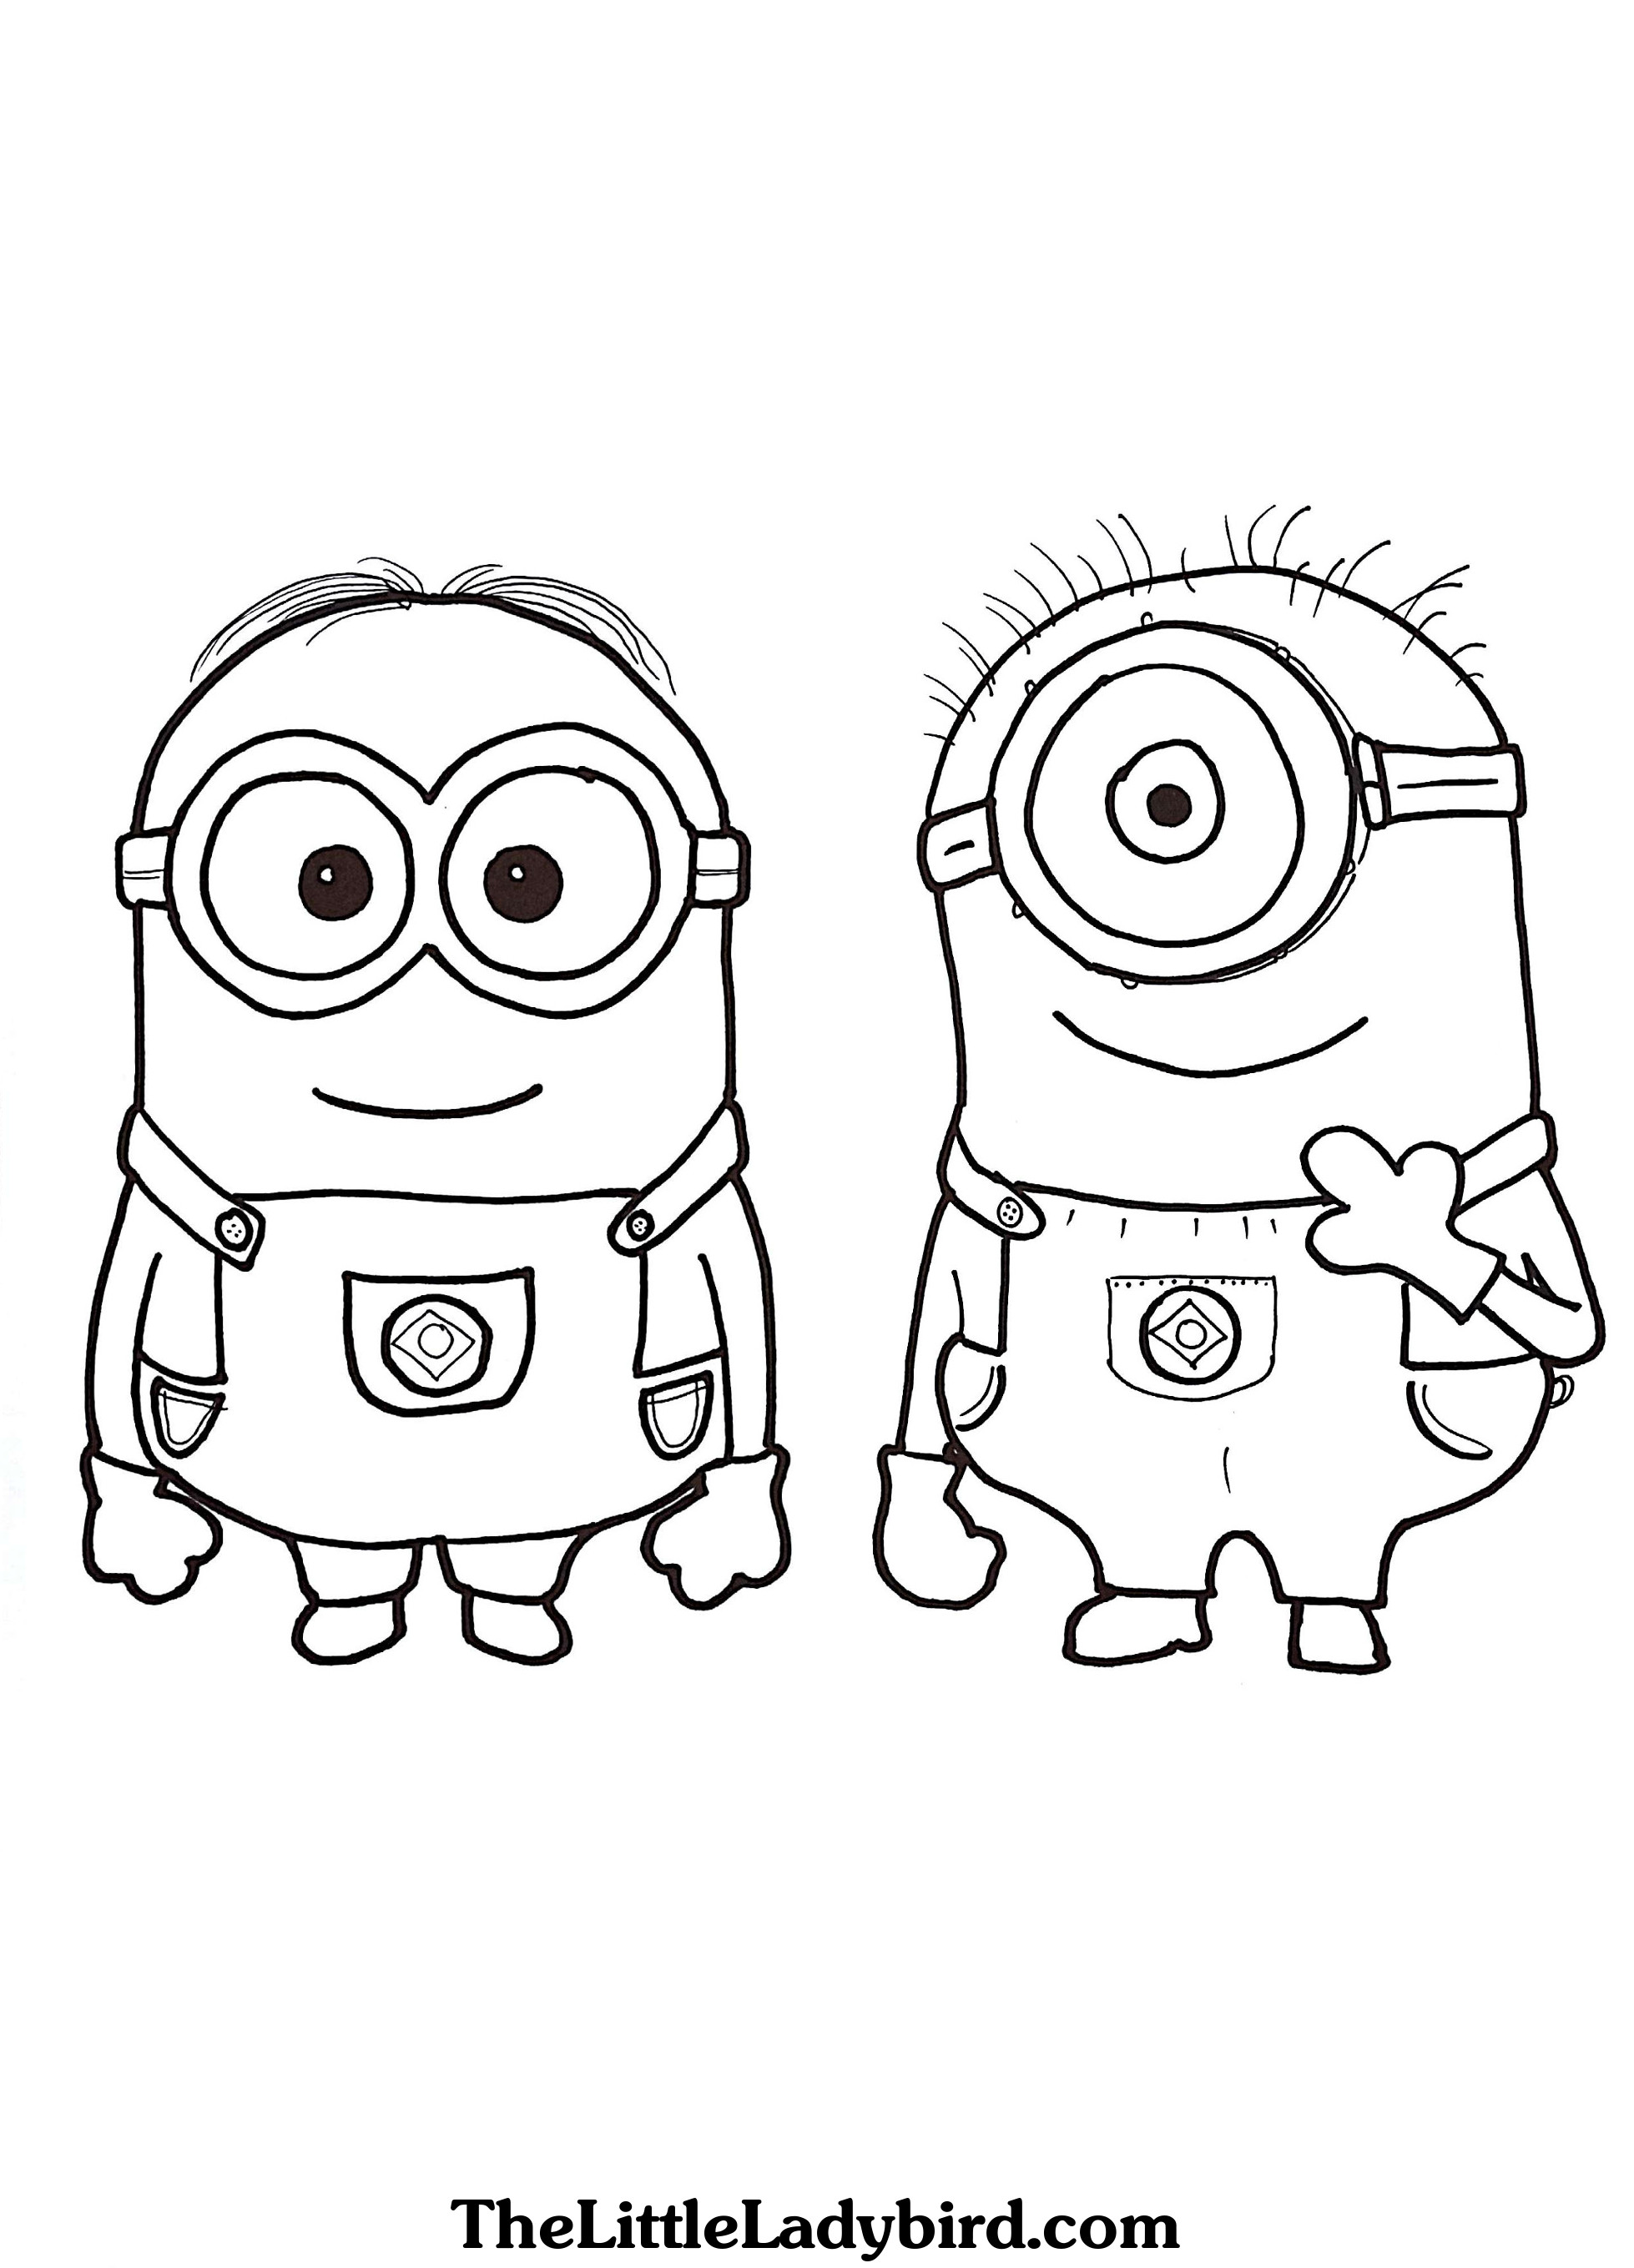 Kevin The Minion Drawing at PaintingValley.com | Explore collection of ...